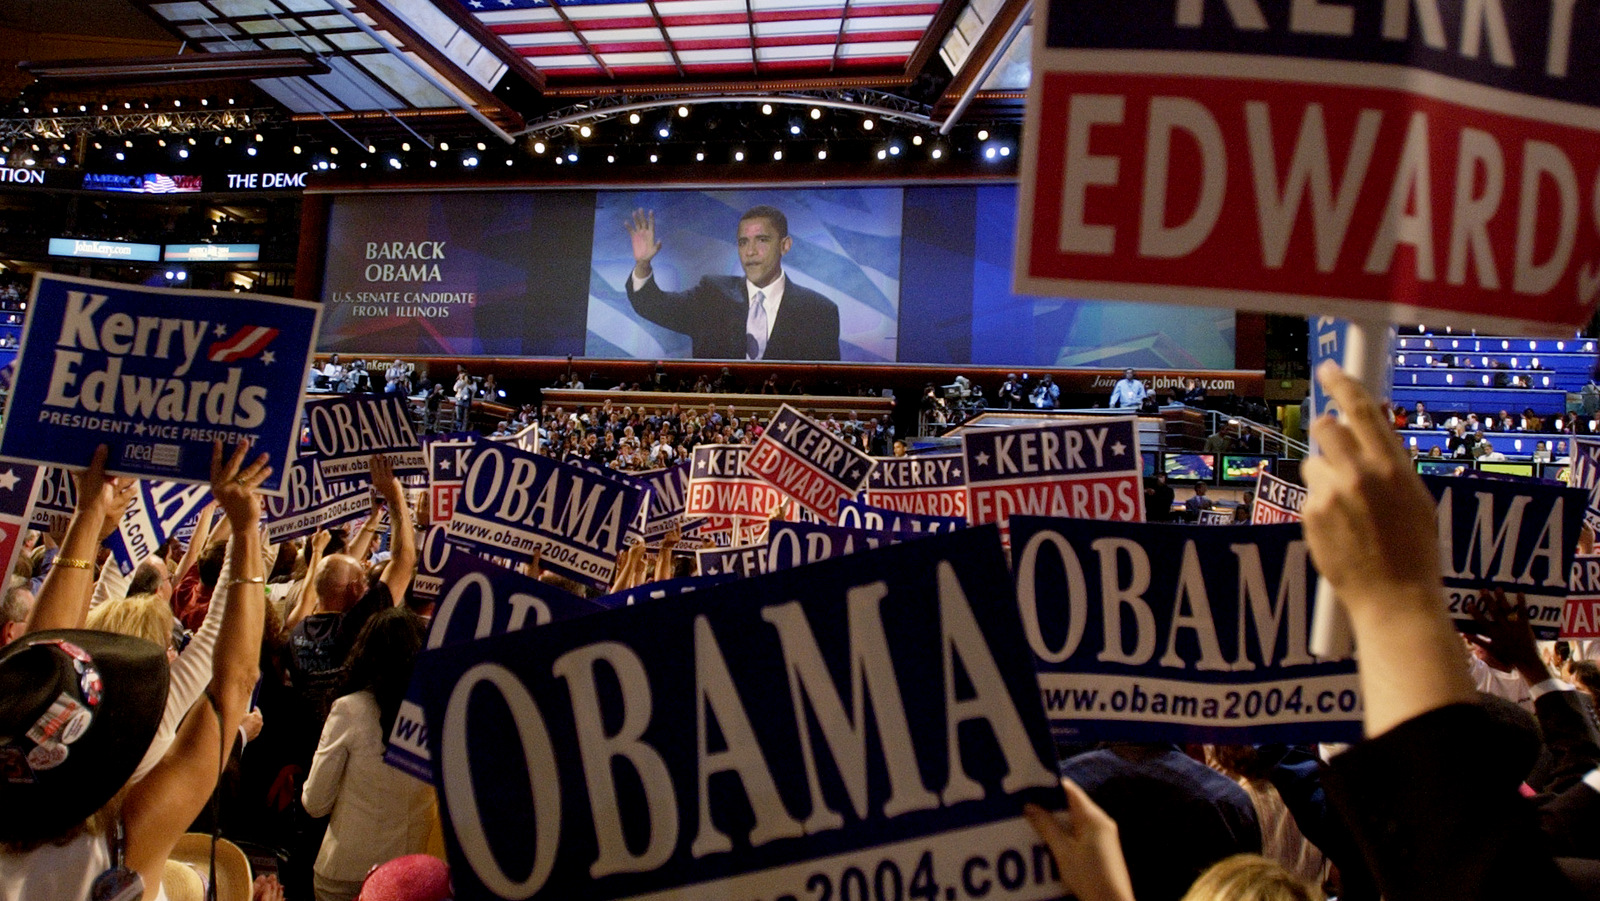 Delegates cheer as keynote speaker Barack Obama, candidate for the Senate from Illinois, speaks during the Democratic National Convention at the FleetCenter in Boston, July 27, 2004. (AP/Laura Rauch)